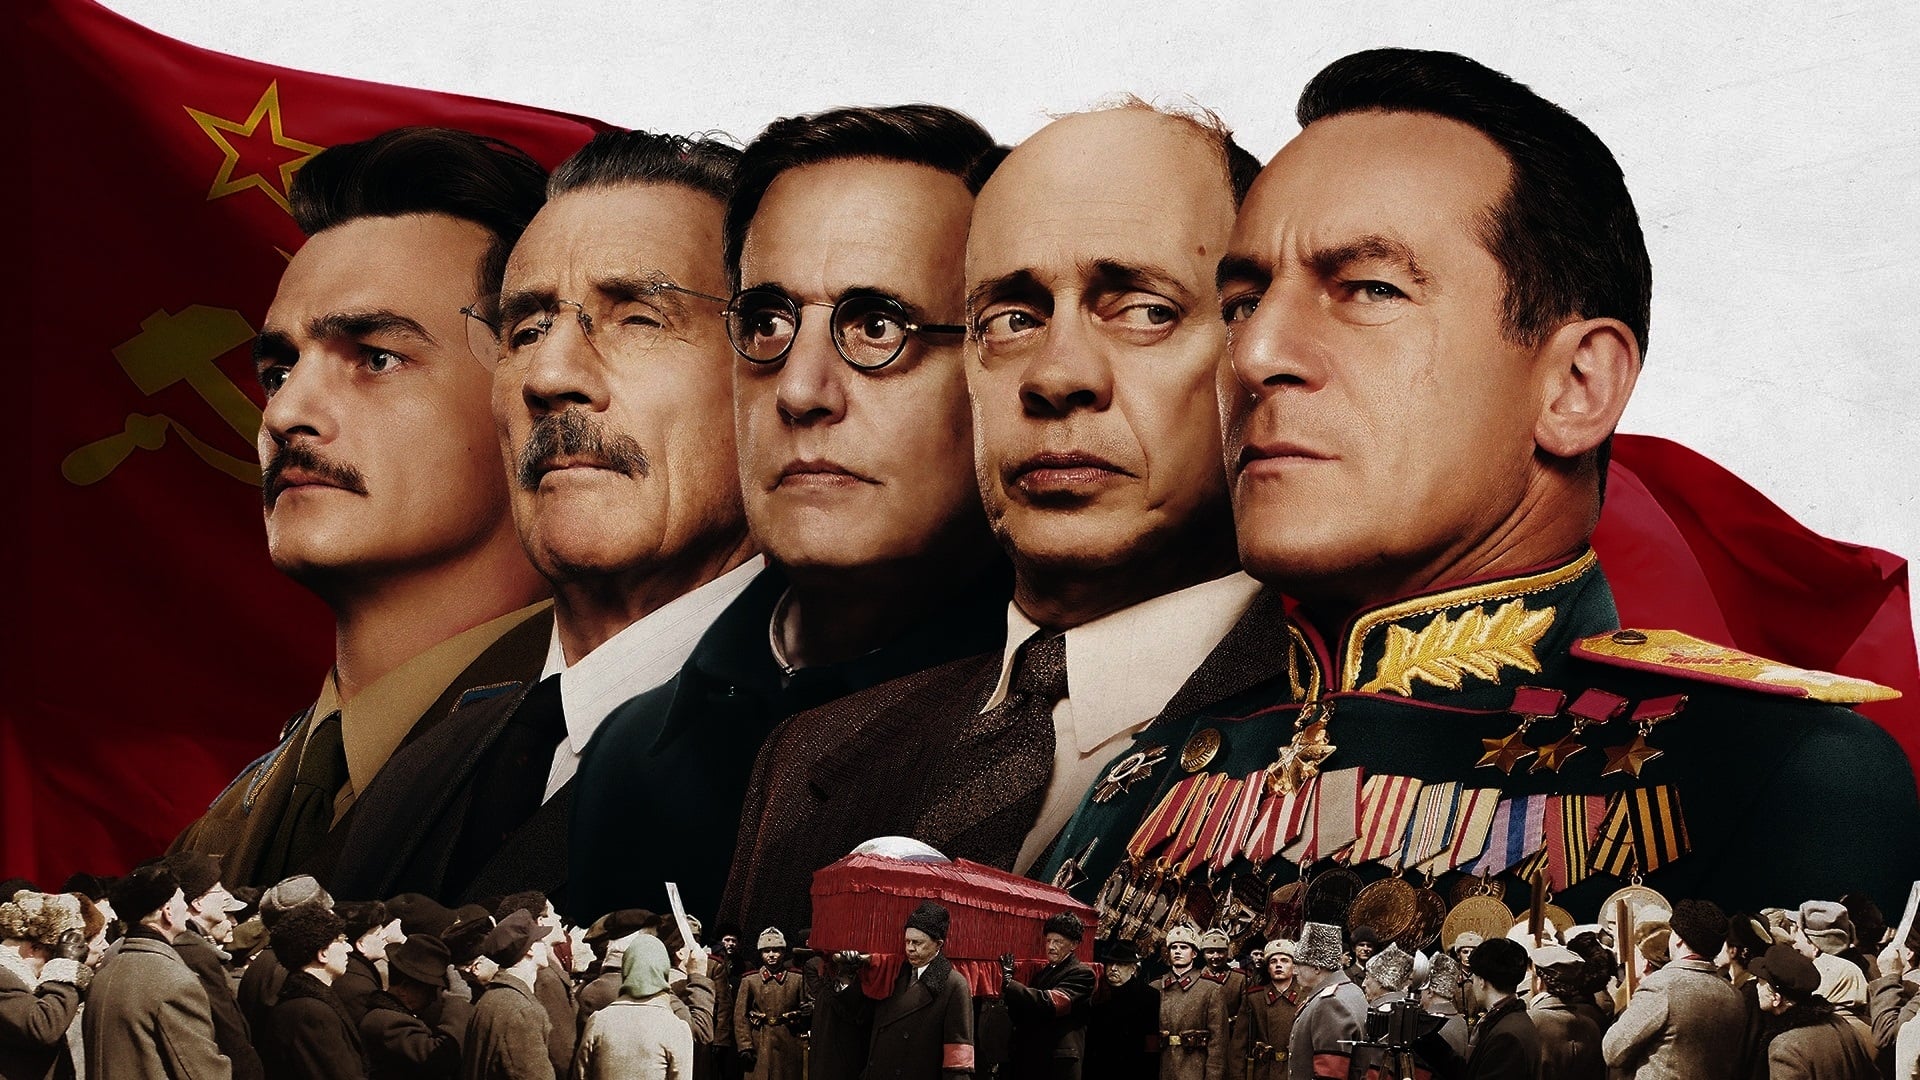 Poster Phim Cái Chết Của Stalin (The Death Of Stalin)